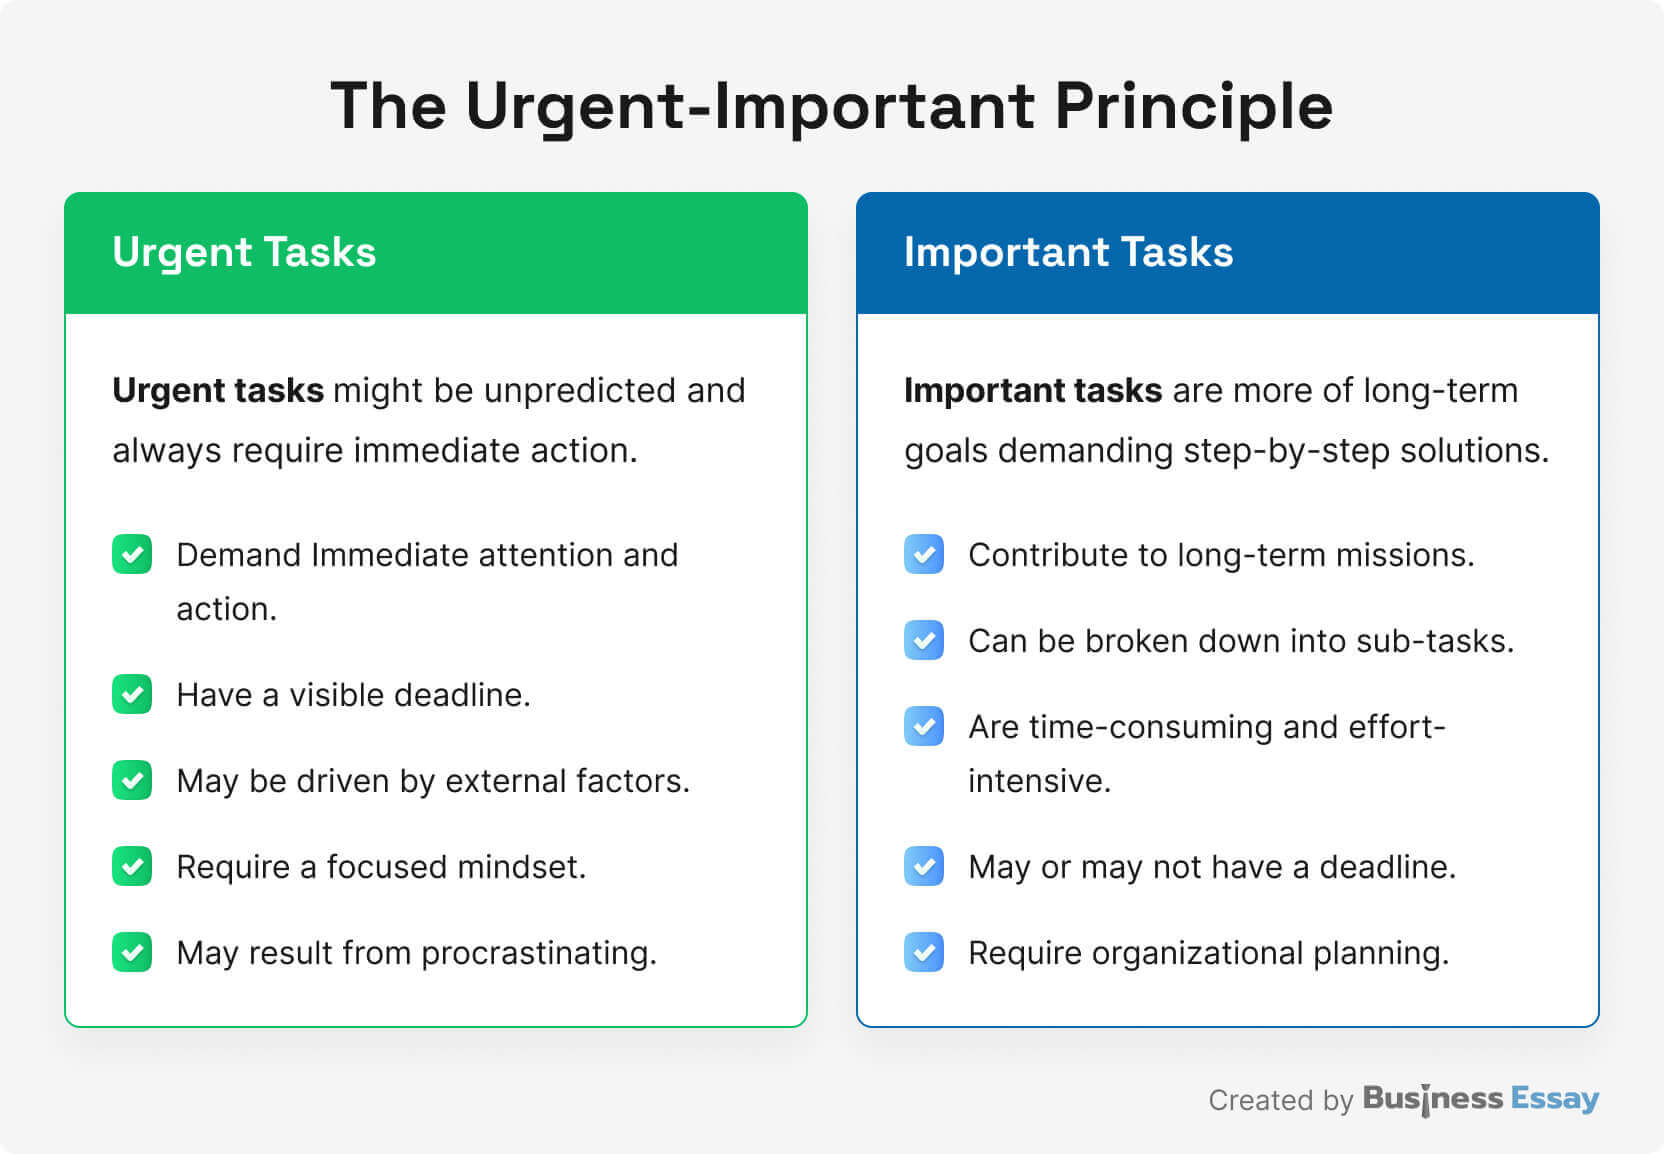 The picture shows the main differences between urgent and important tasks.